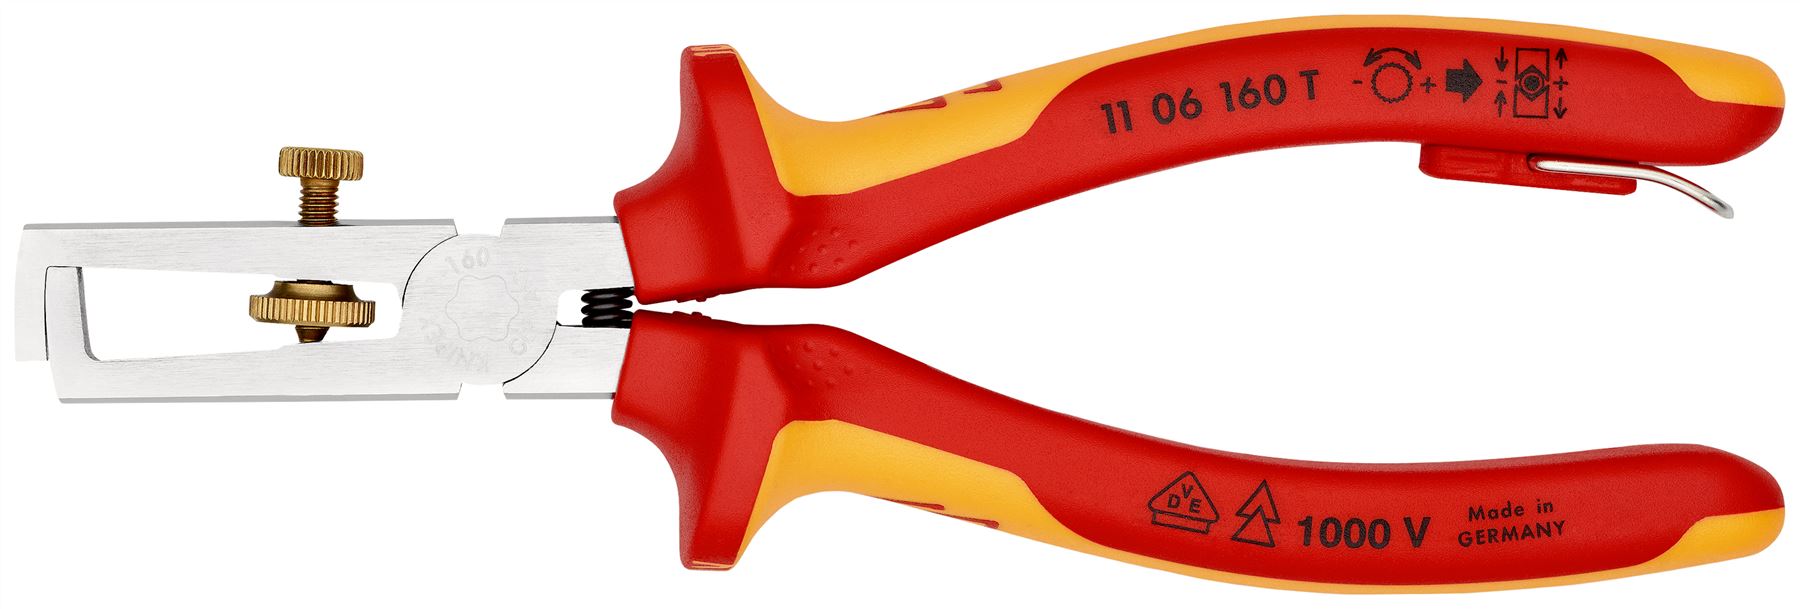 Knipex Insulation Stripper with Opening Spring 160mm VDE Insulated 1000V with Tether Point 11 06 160 T